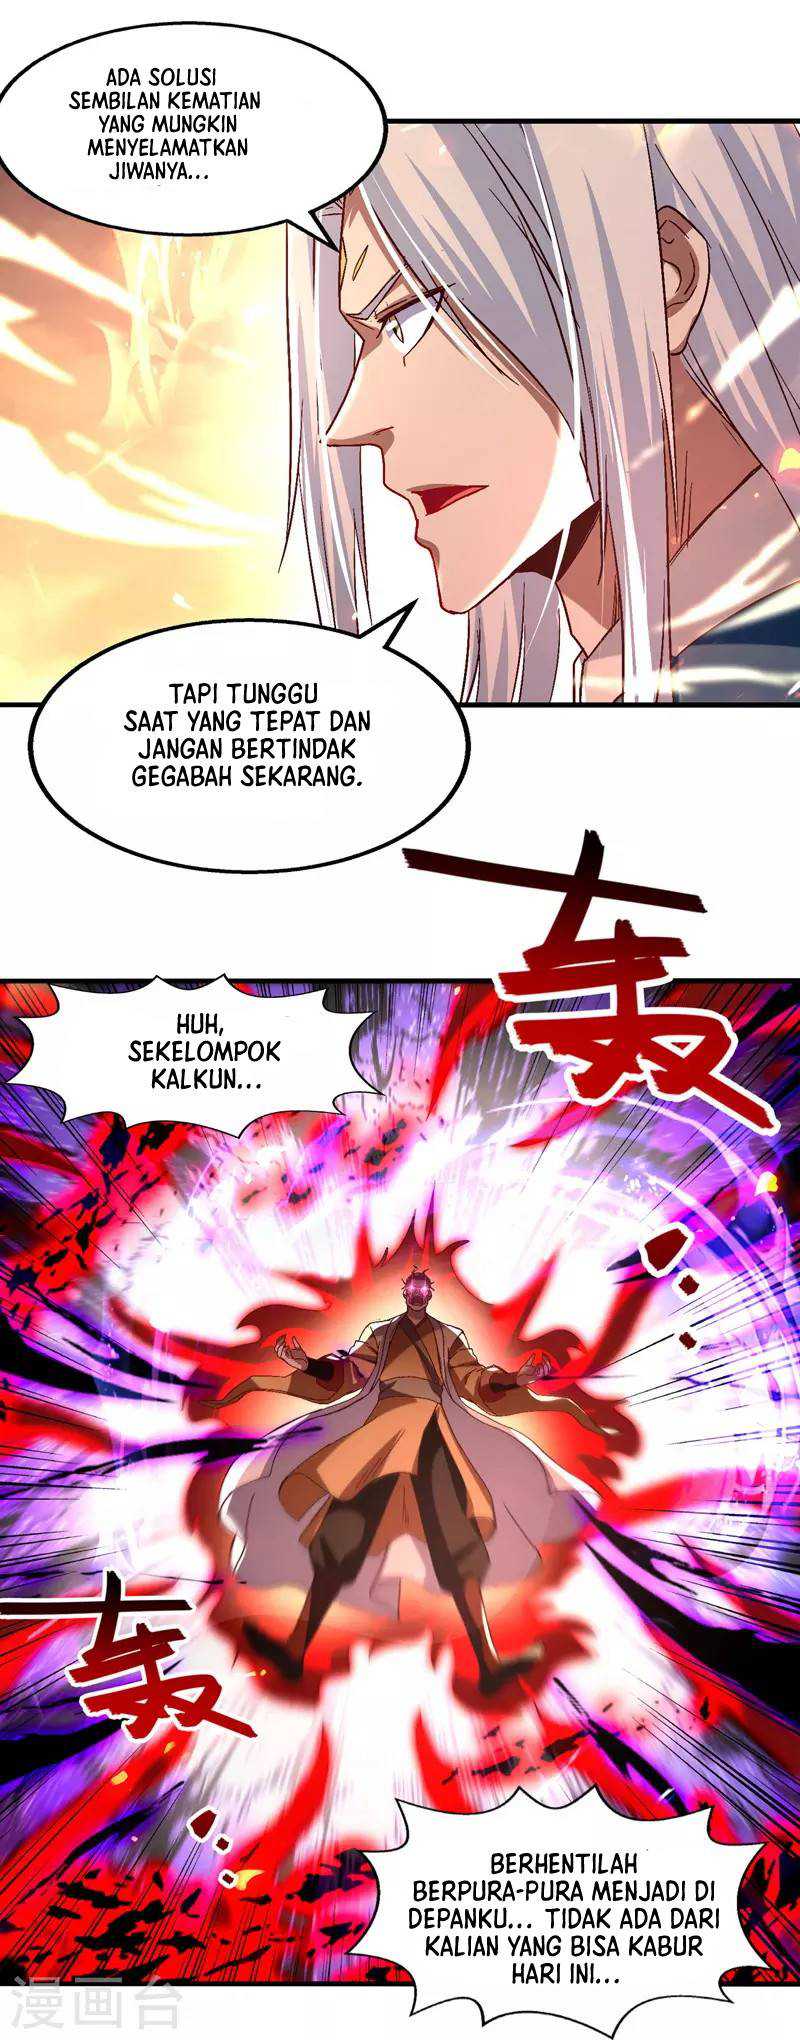 Against The Heaven Supreme (Heaven Guards) Chapter 75